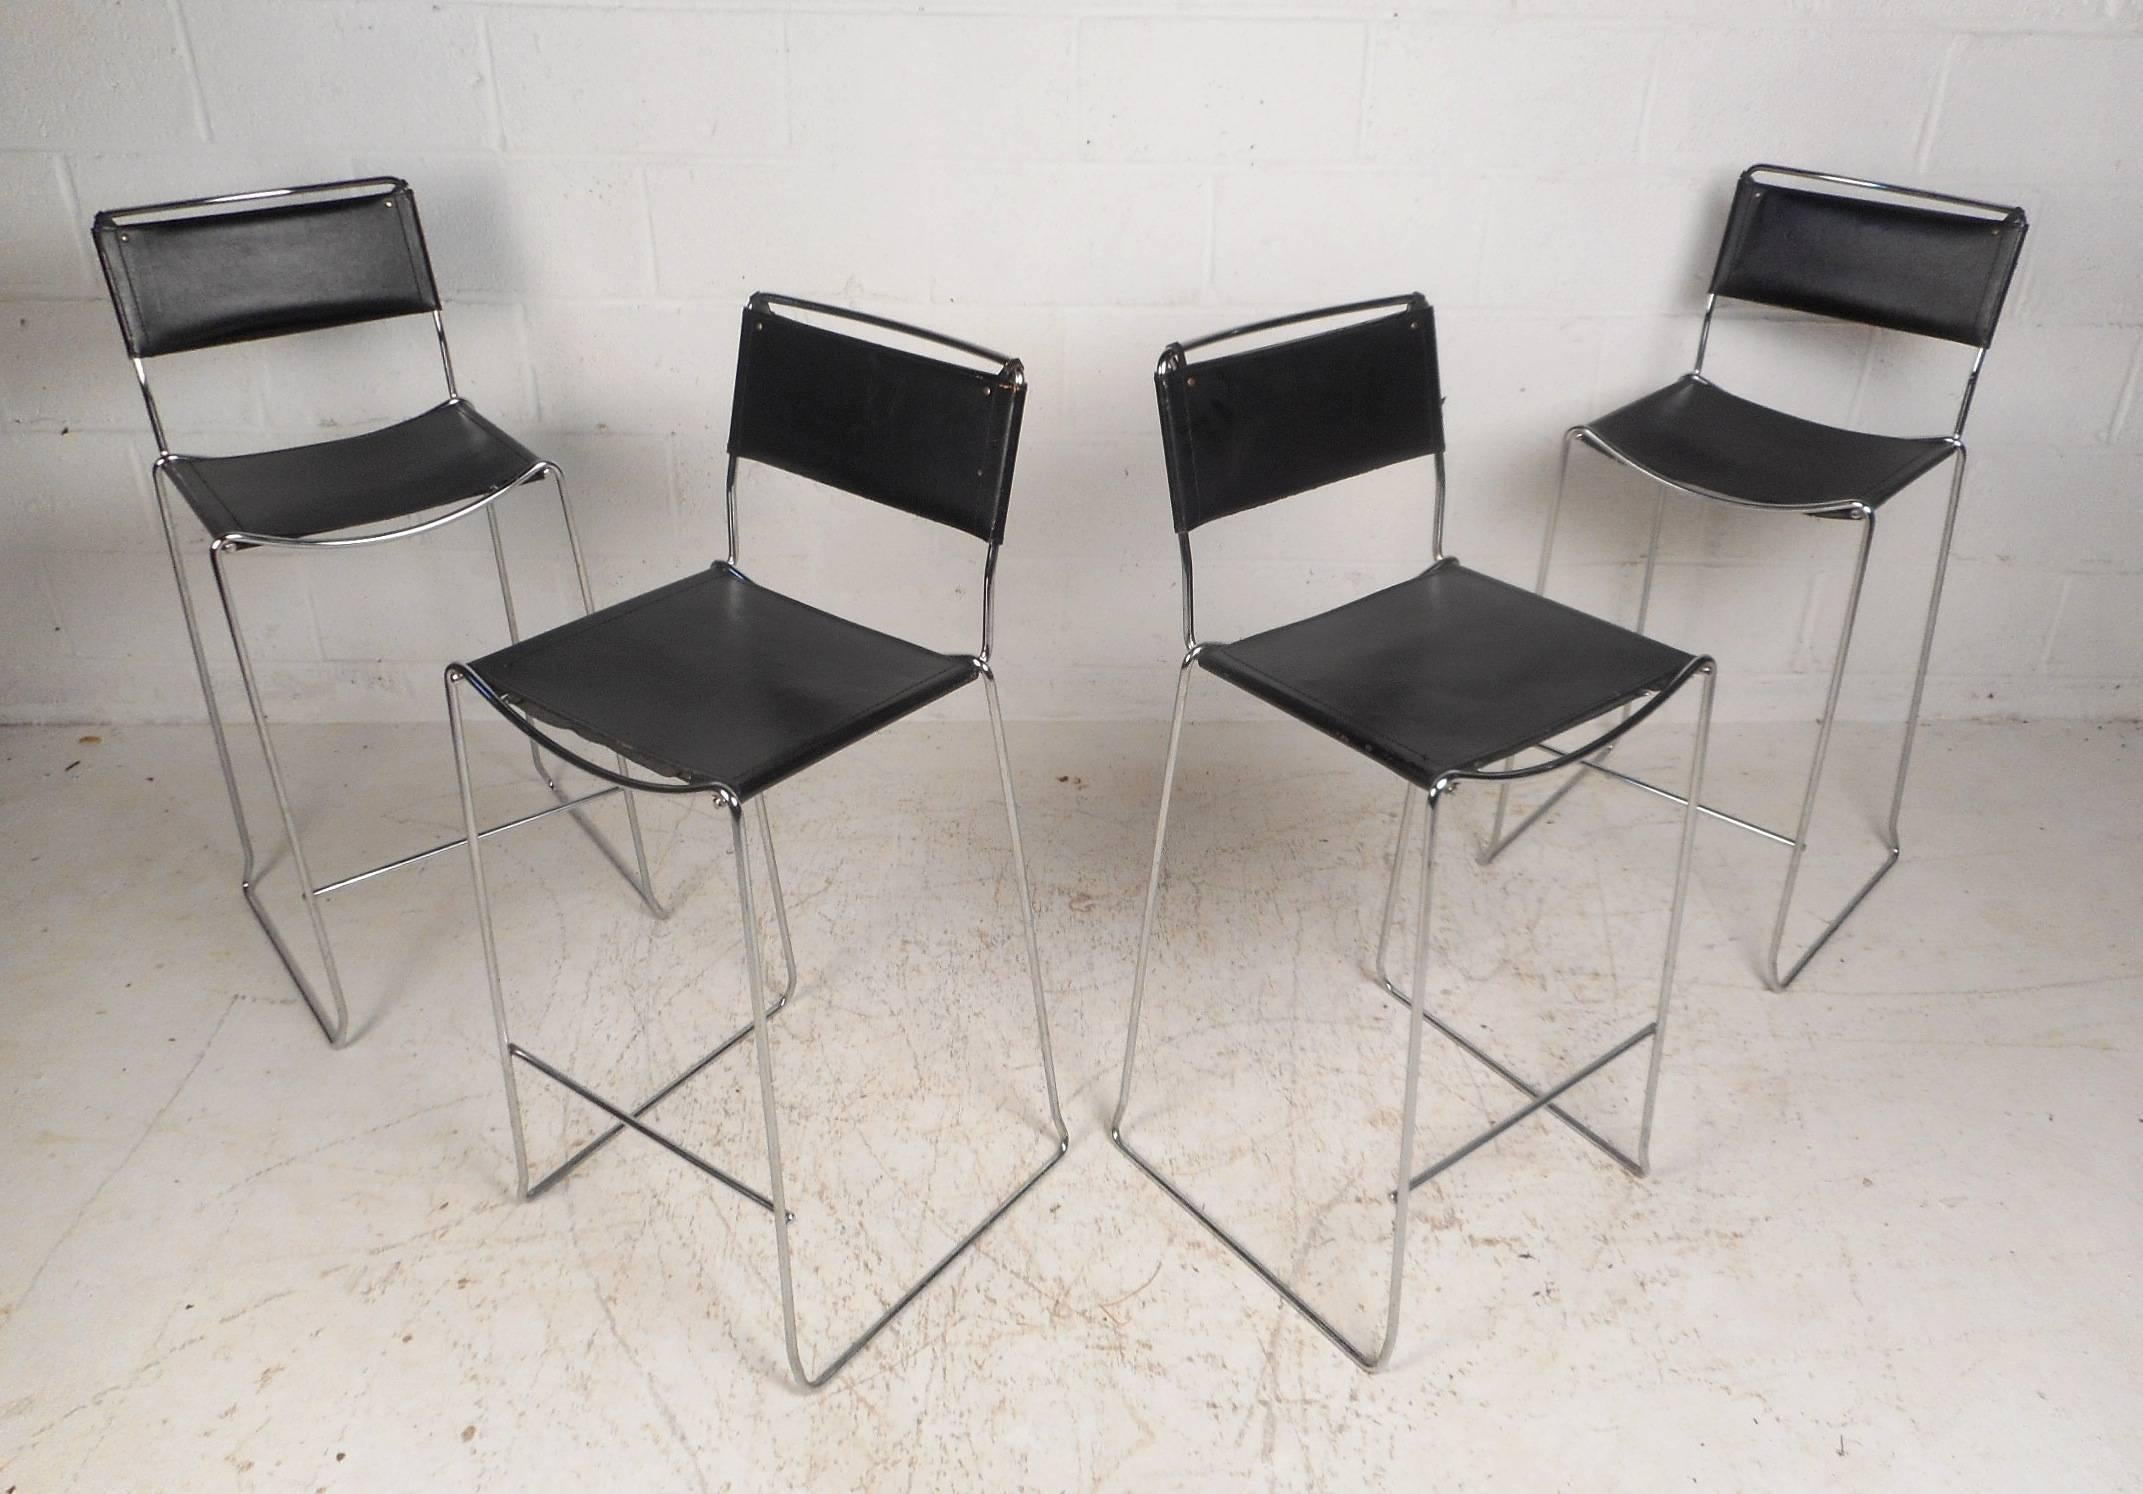 This stunning set of four vintage modern bar stools feature chrome rod frames and sled legs. A sleek design with leather seats and back rests ensuring maximum comfort. These comfortable and stylish stools make the perfect addition to any seating